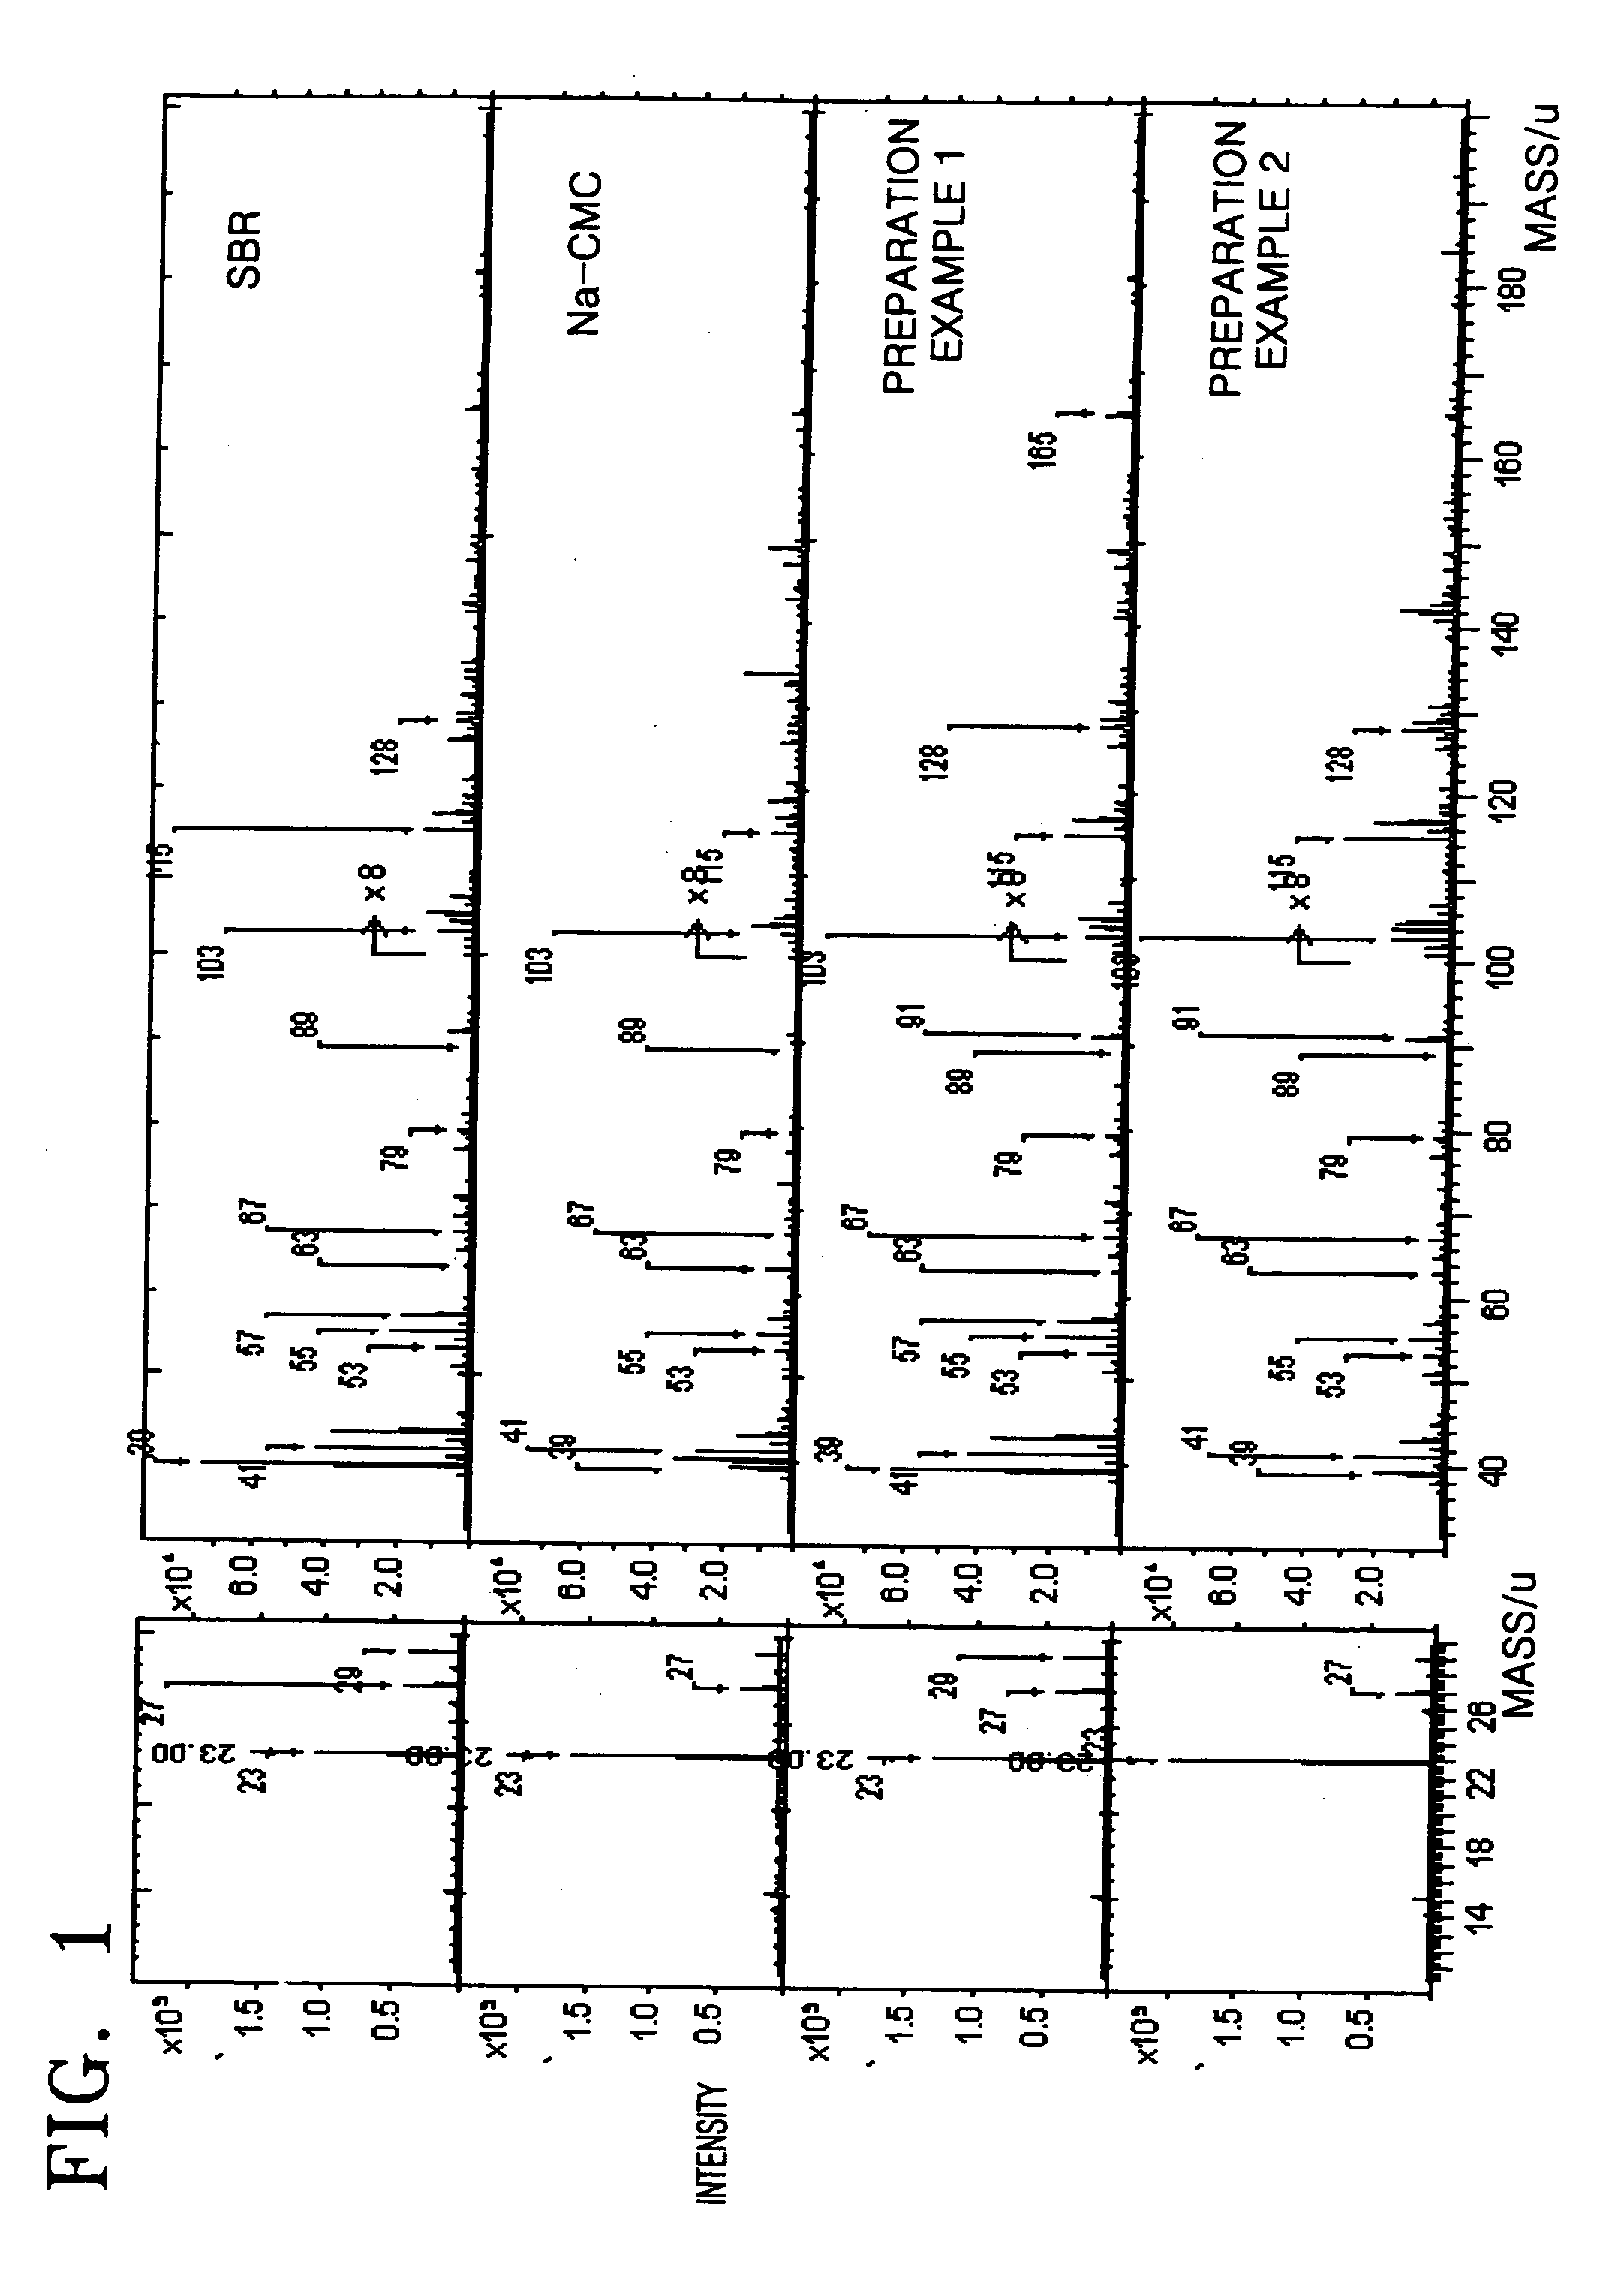 Anode and lithium battery including the anode